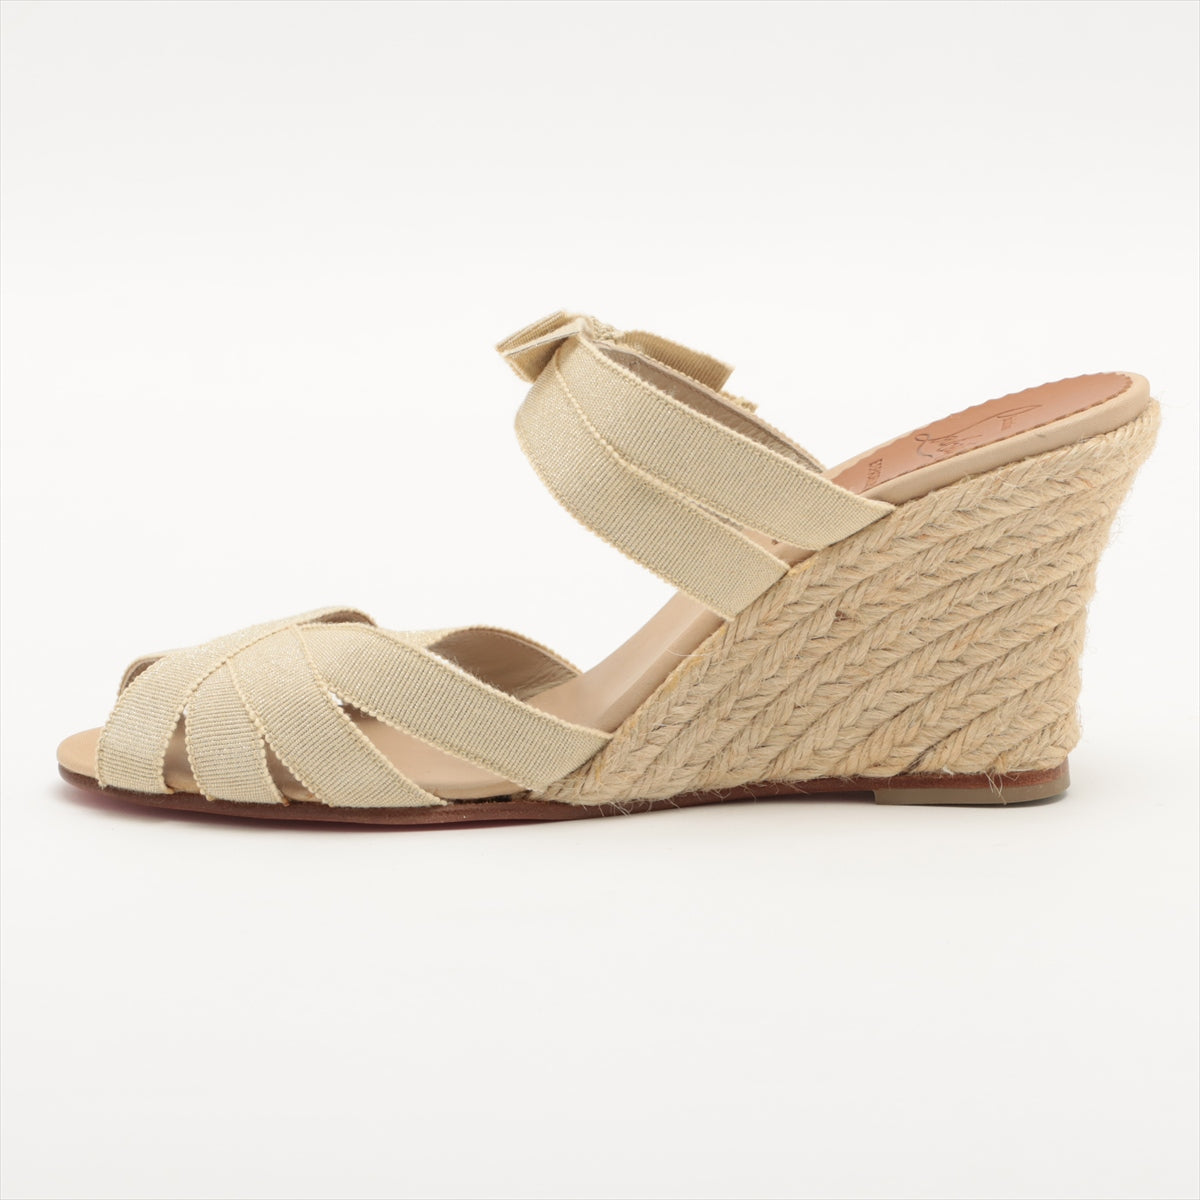 Christian Louboutin Fabric Wedge Sole Sandals 36 Ladies' Beige box There is a bag Espadrilles